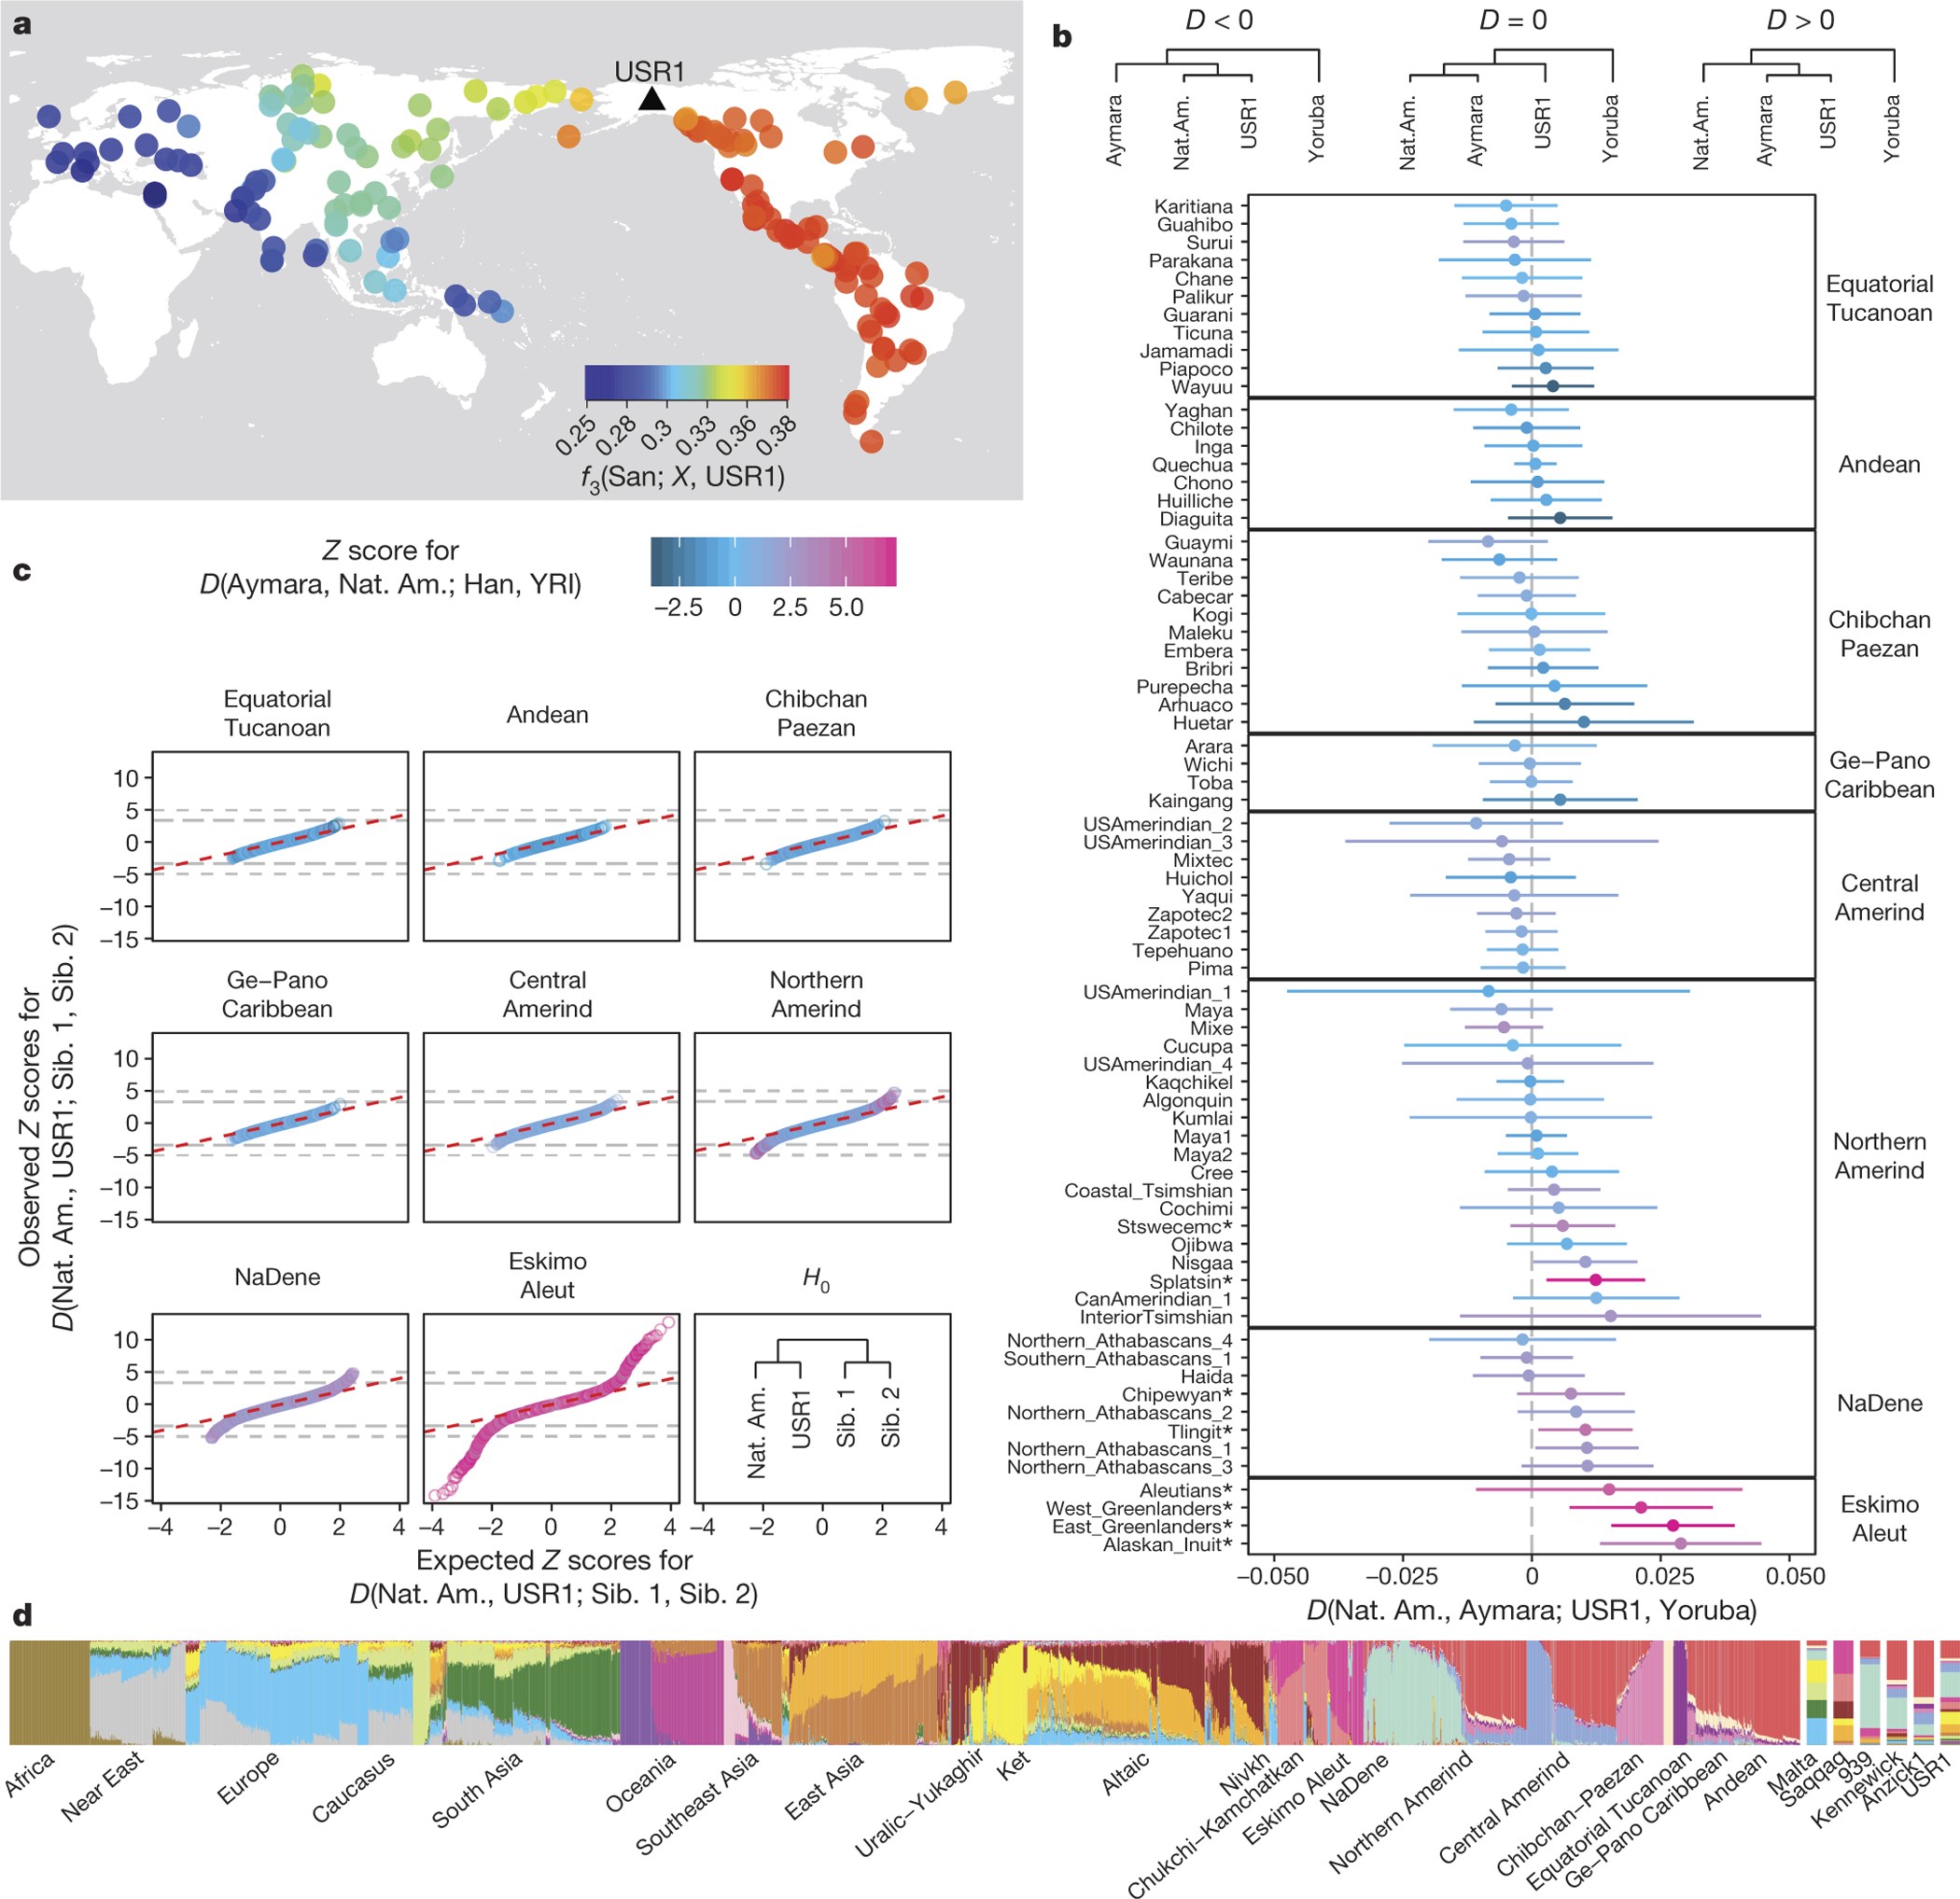 Terminal Pleistocene genome reveals first founding population of Native Americans | Nature